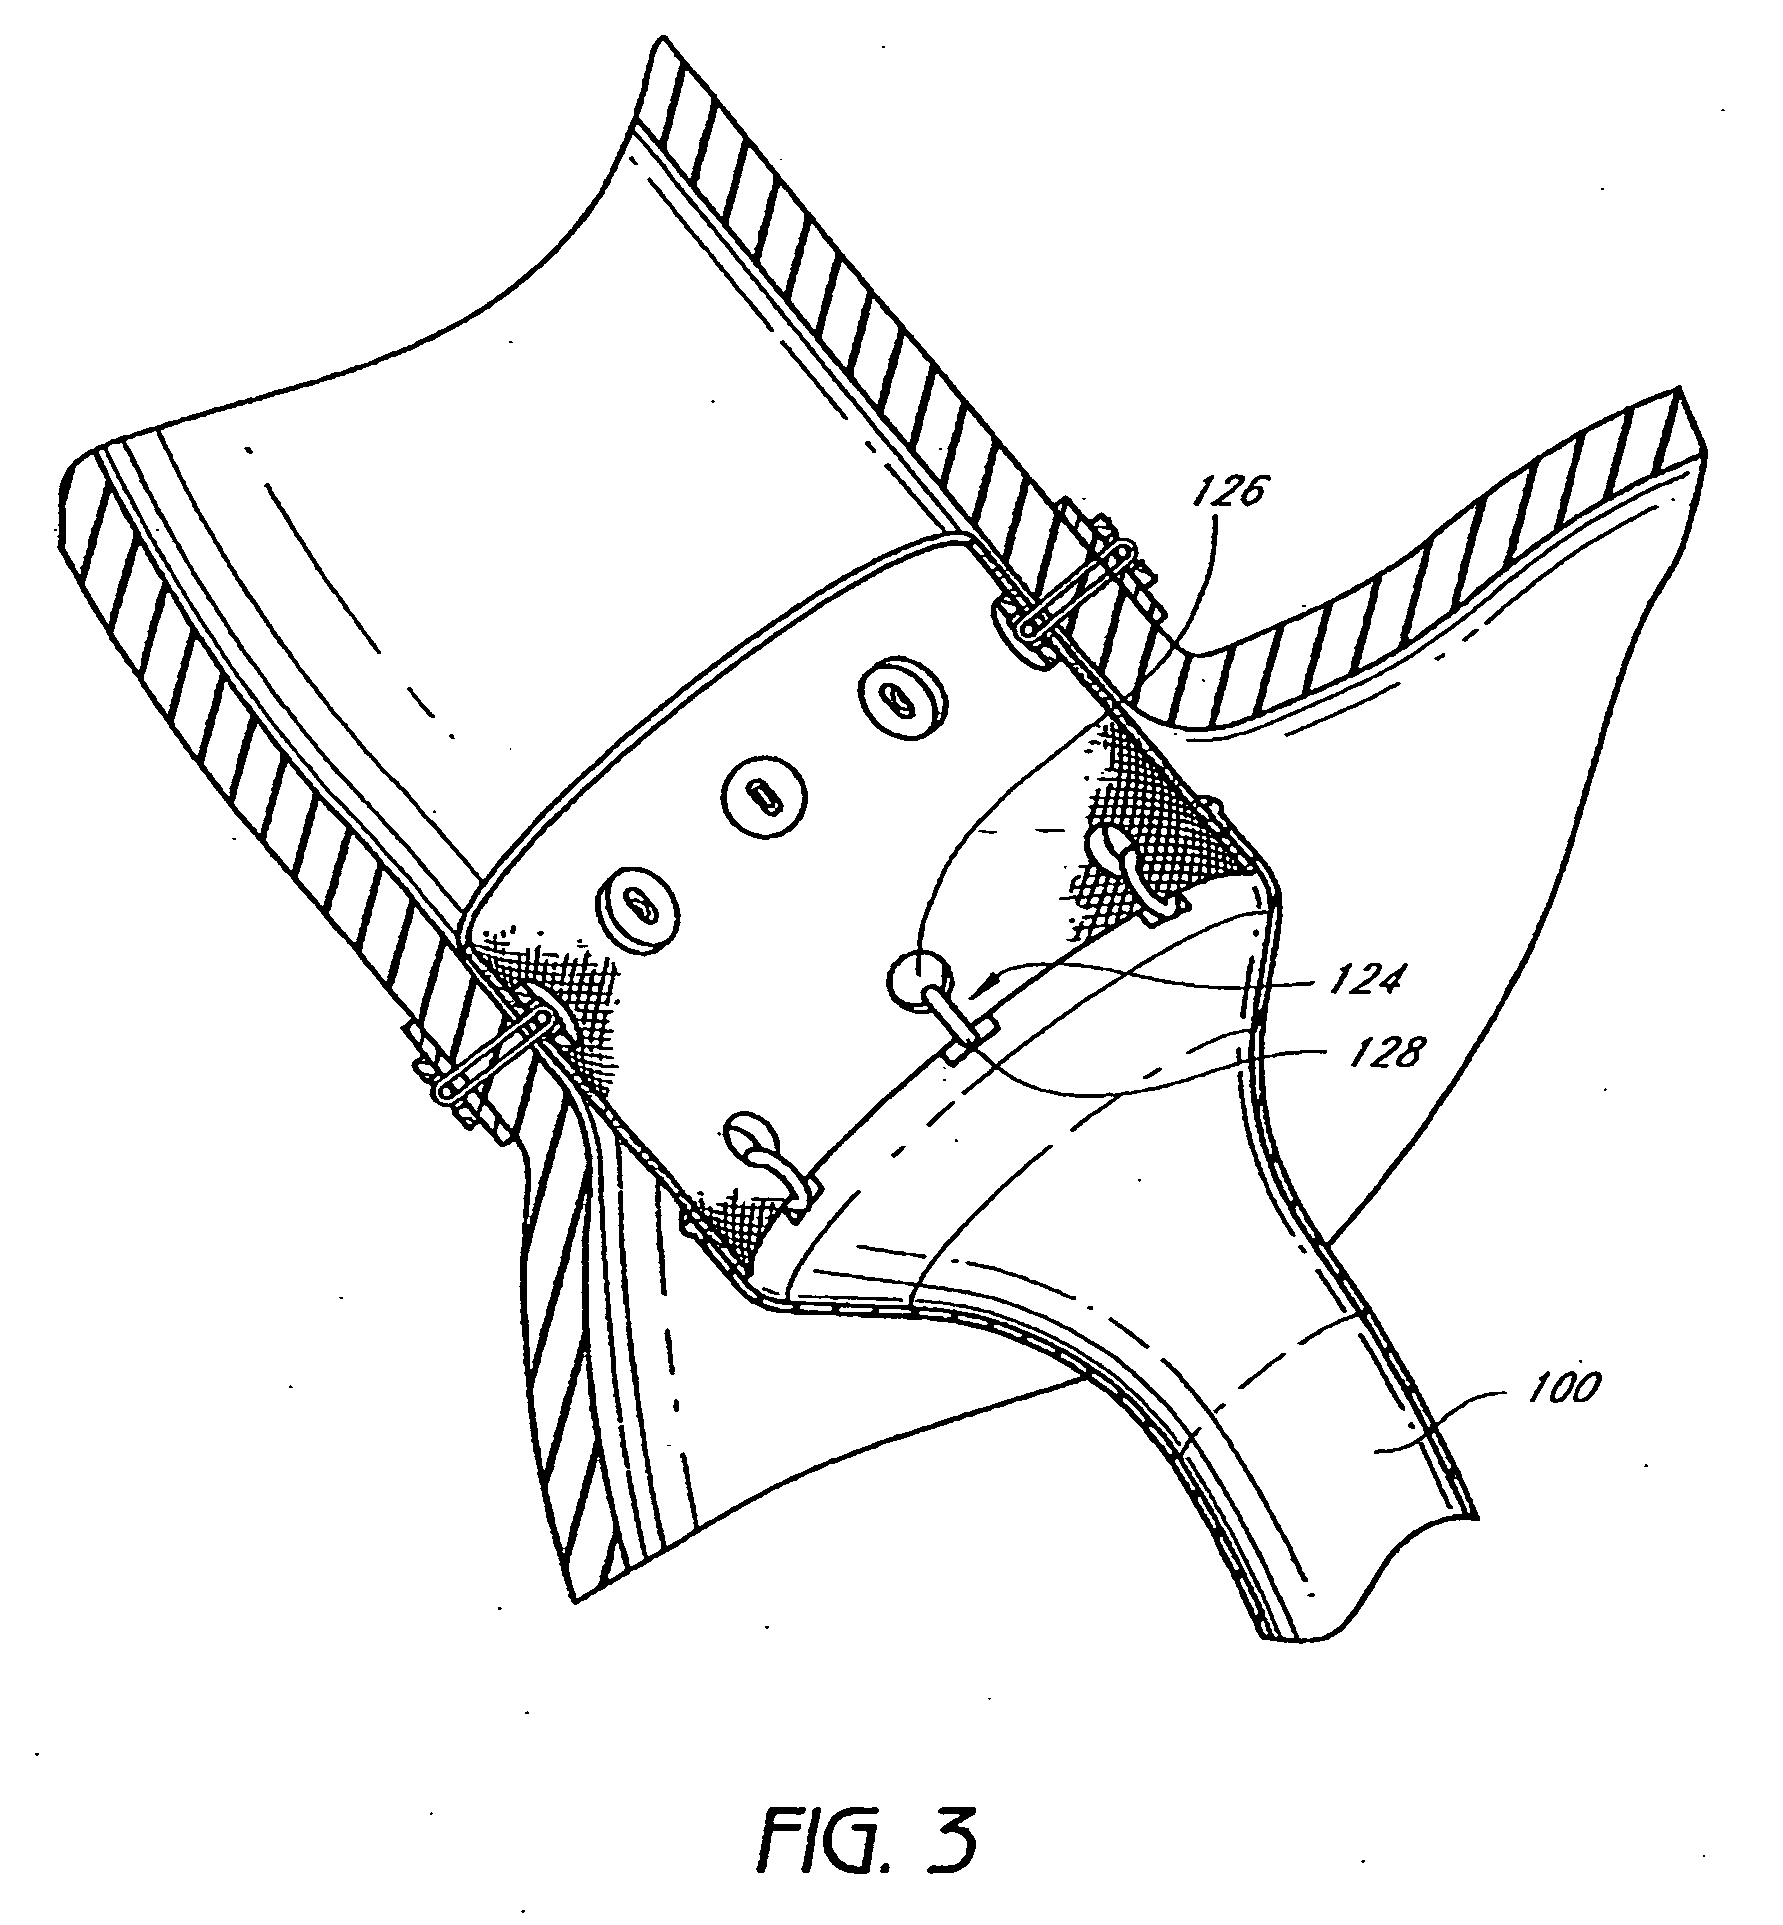 Cuff and sleeve system for gastrointestinal bypass